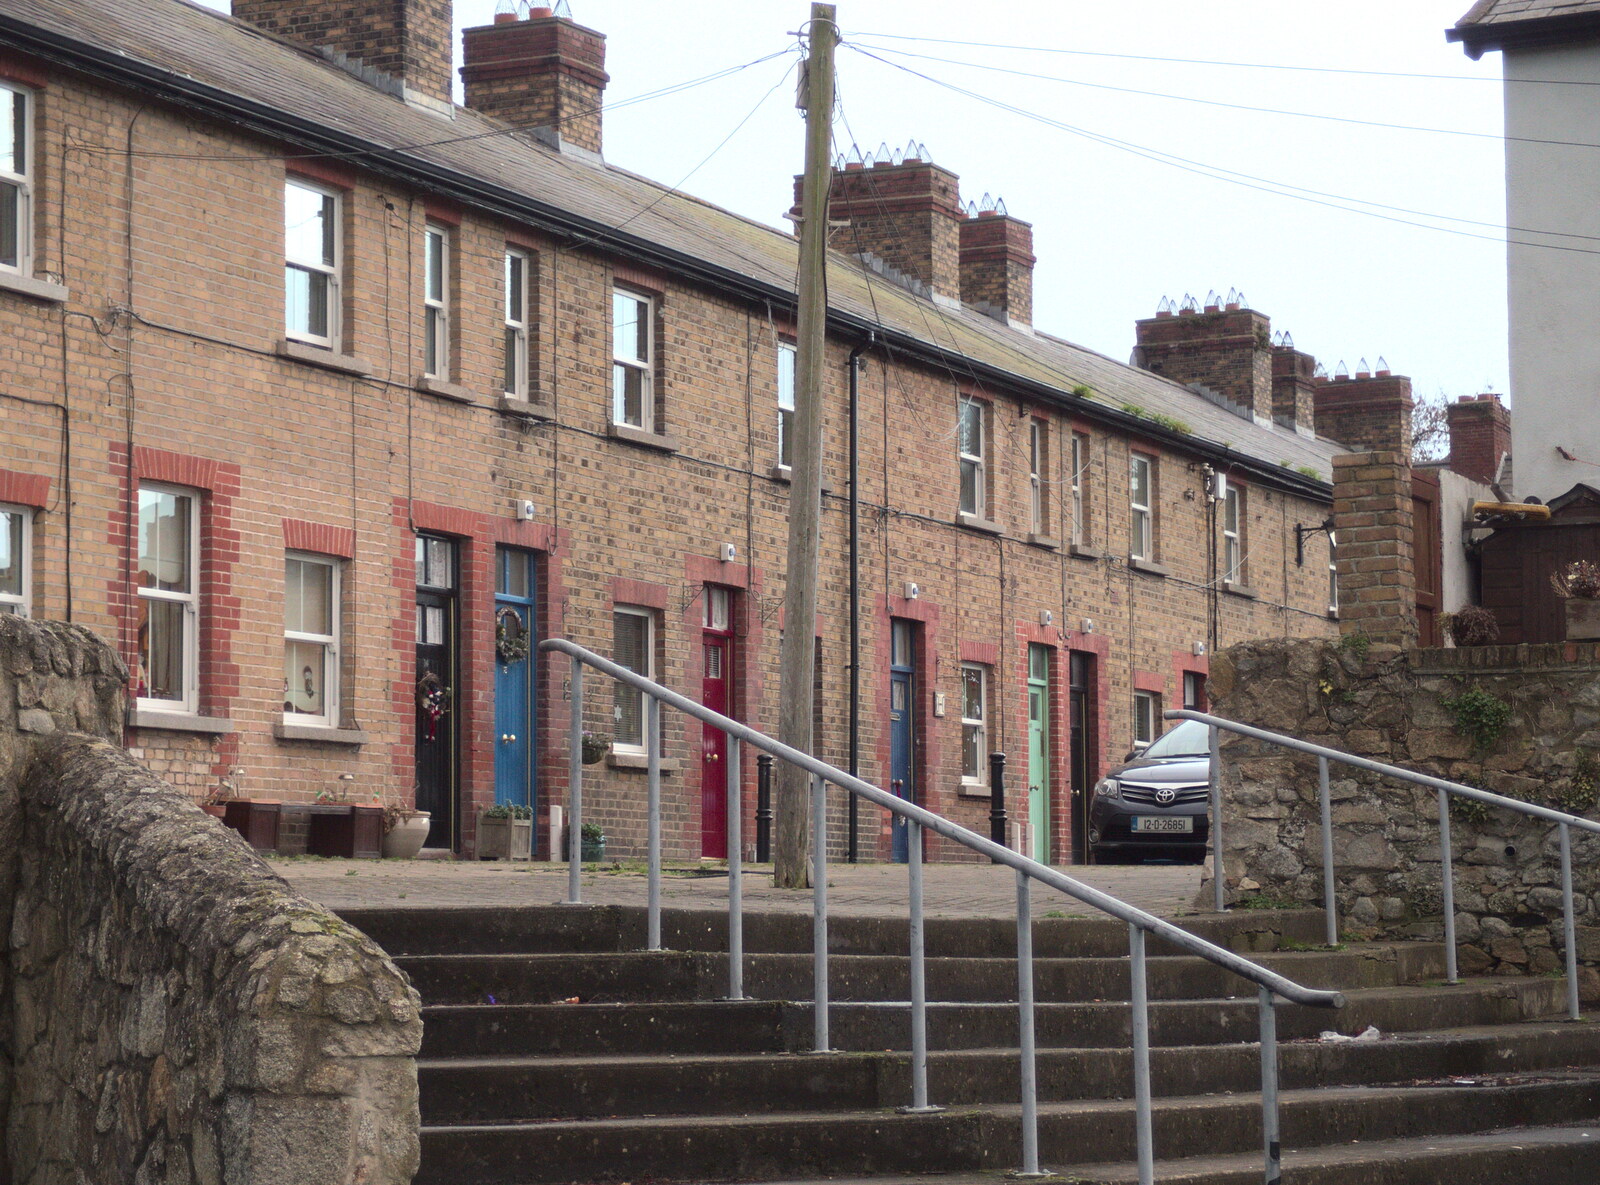 Terraced houses from Christmas Eve in Dublin and Blackrock, Ireland - 24th December 2015